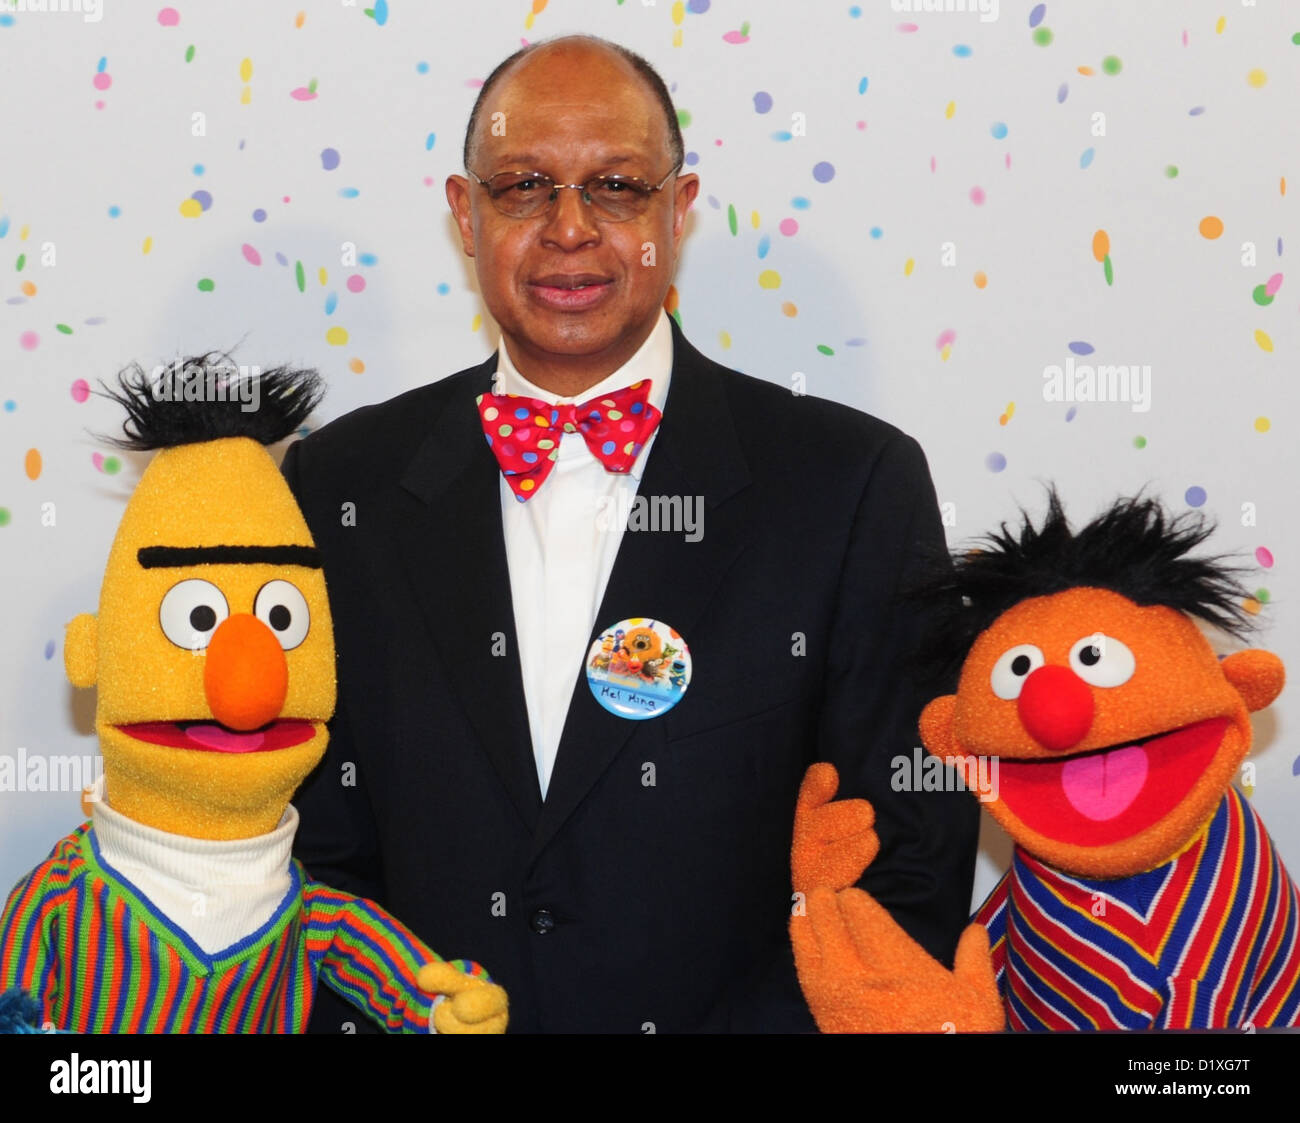 Sesame Street Muppets Ernie and Bert pose for photographs with Sesame Workshop President and CEO Melvin Ming during a press conference on the 40th anniversary of the Sesame Street in Hamburg, Germany, 07 January 2013. On 8 January 1973, the children's television series Sesame Street premiered in Germany. Photo: Revierfoto Stock Photo